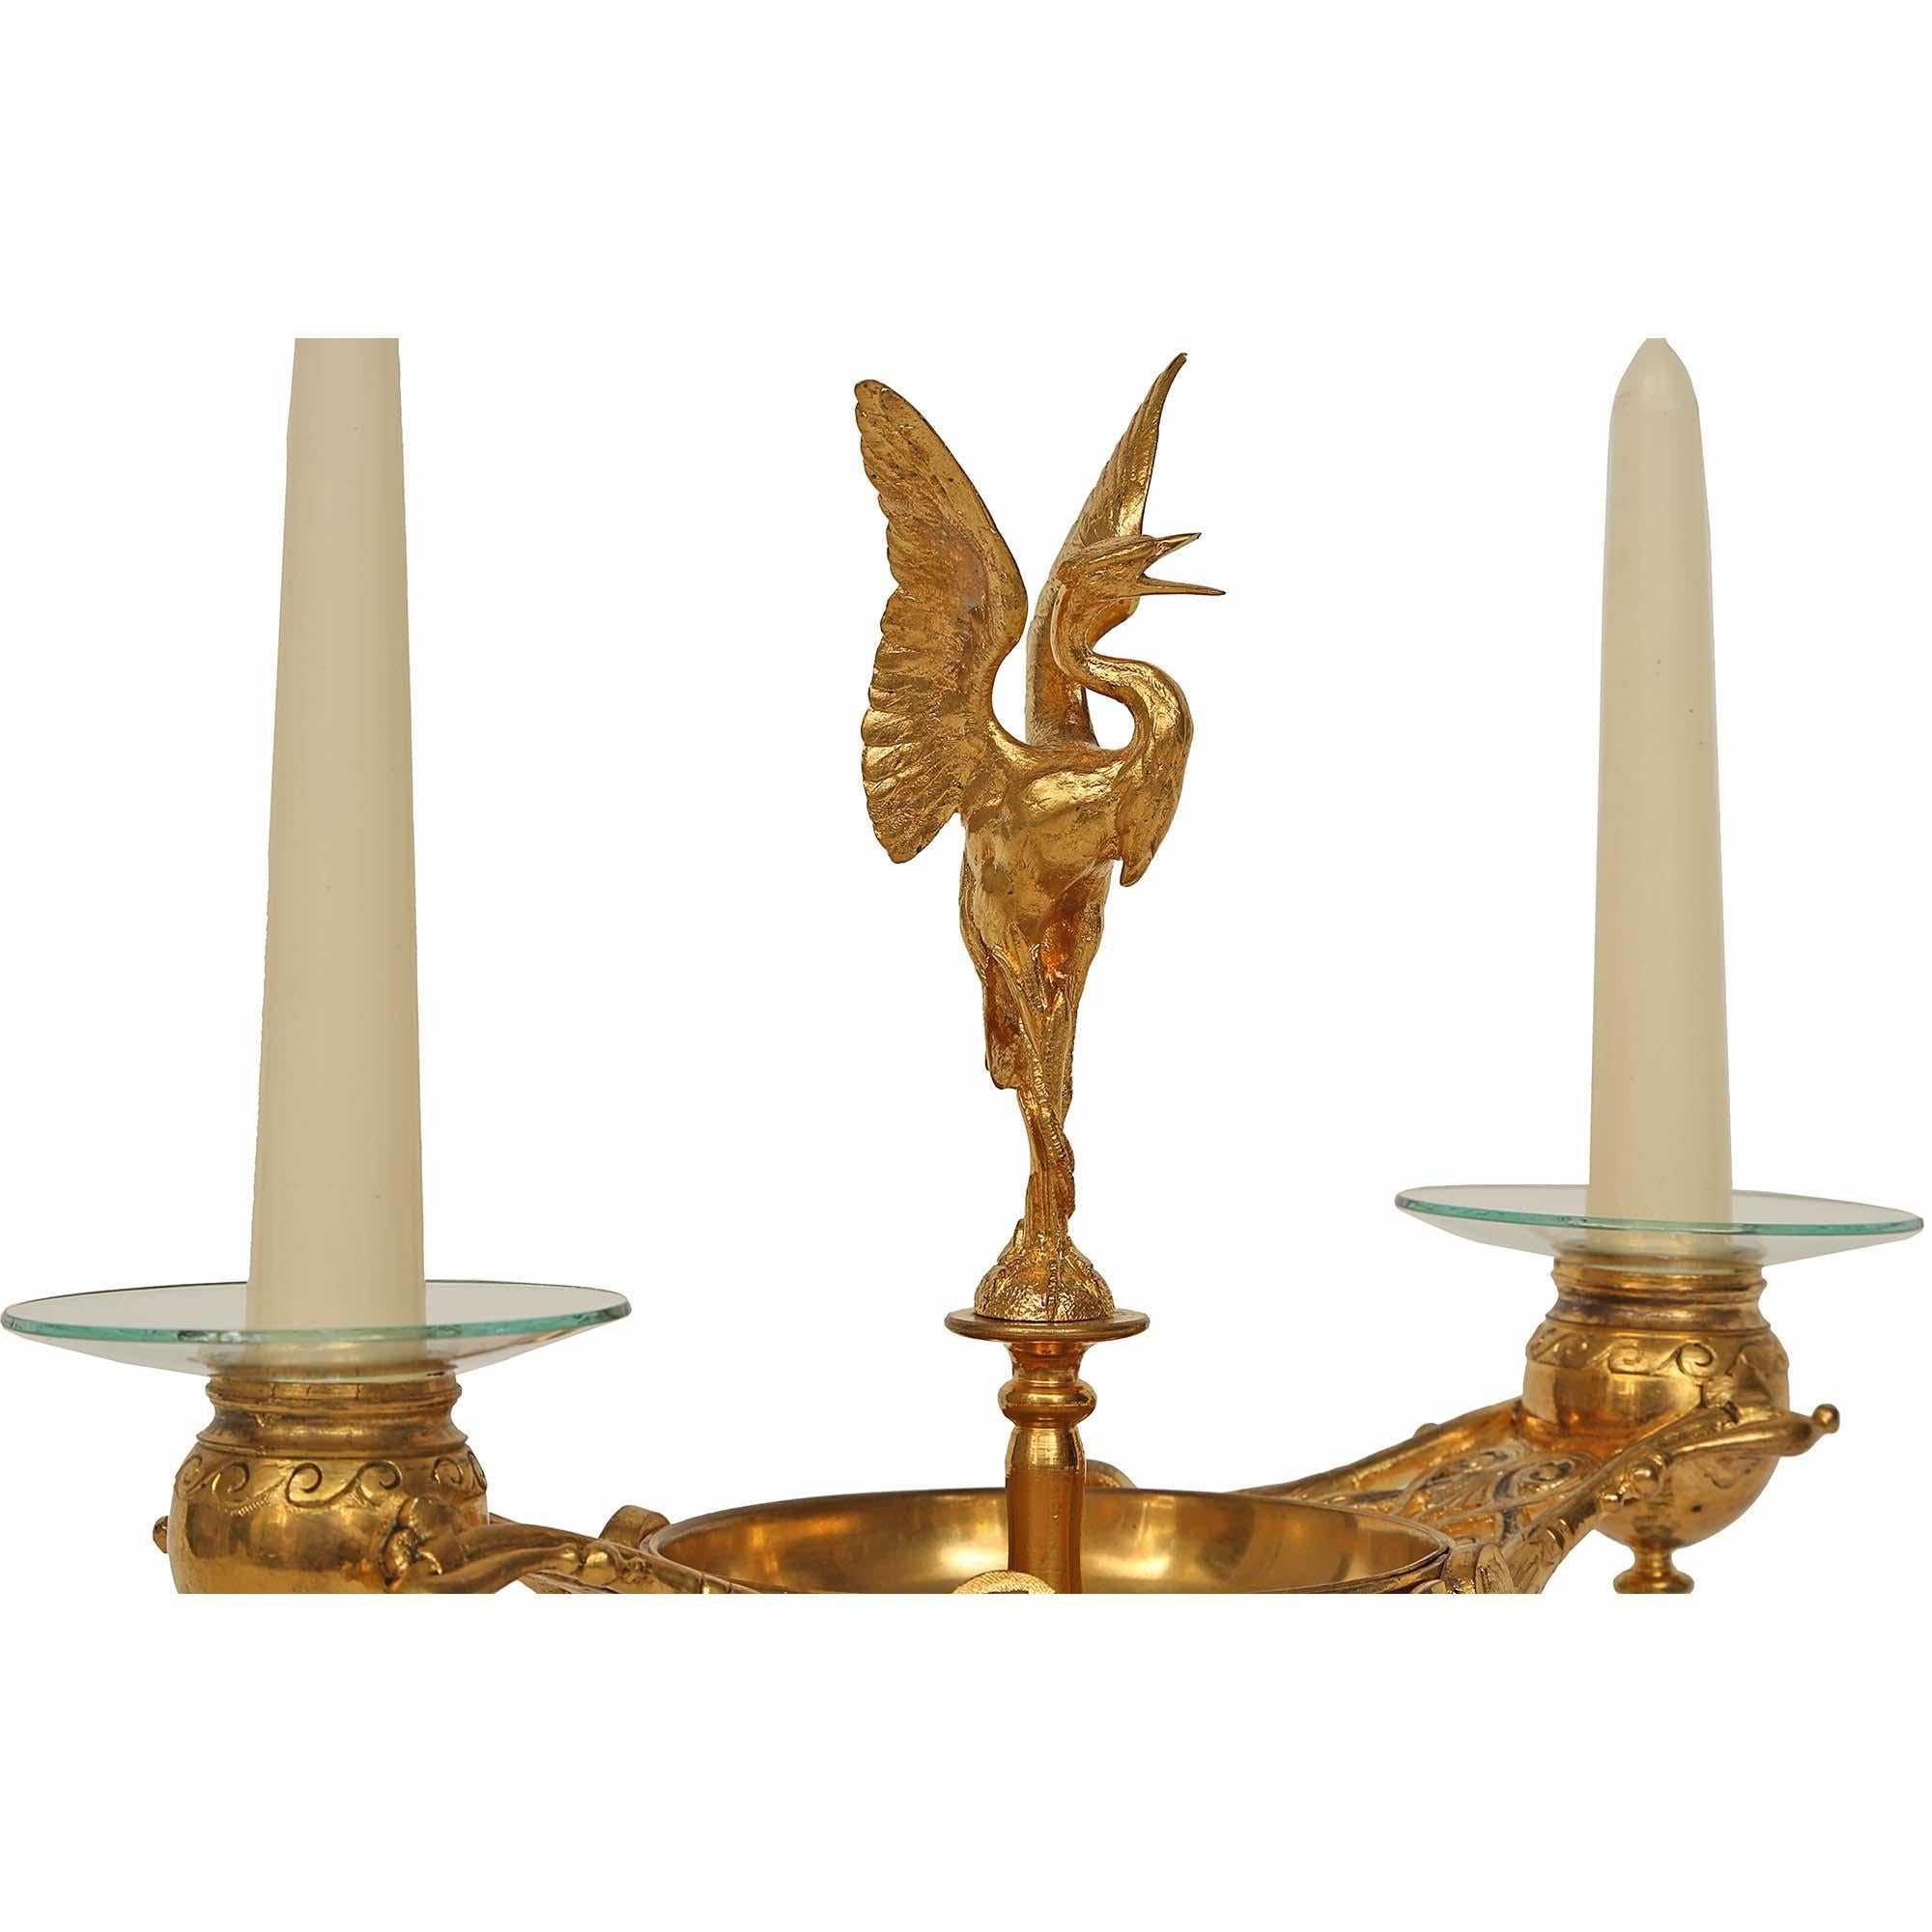 Pair of French 19th Century Renaissance Style Ormolu and Marble Candelabras For Sale 2